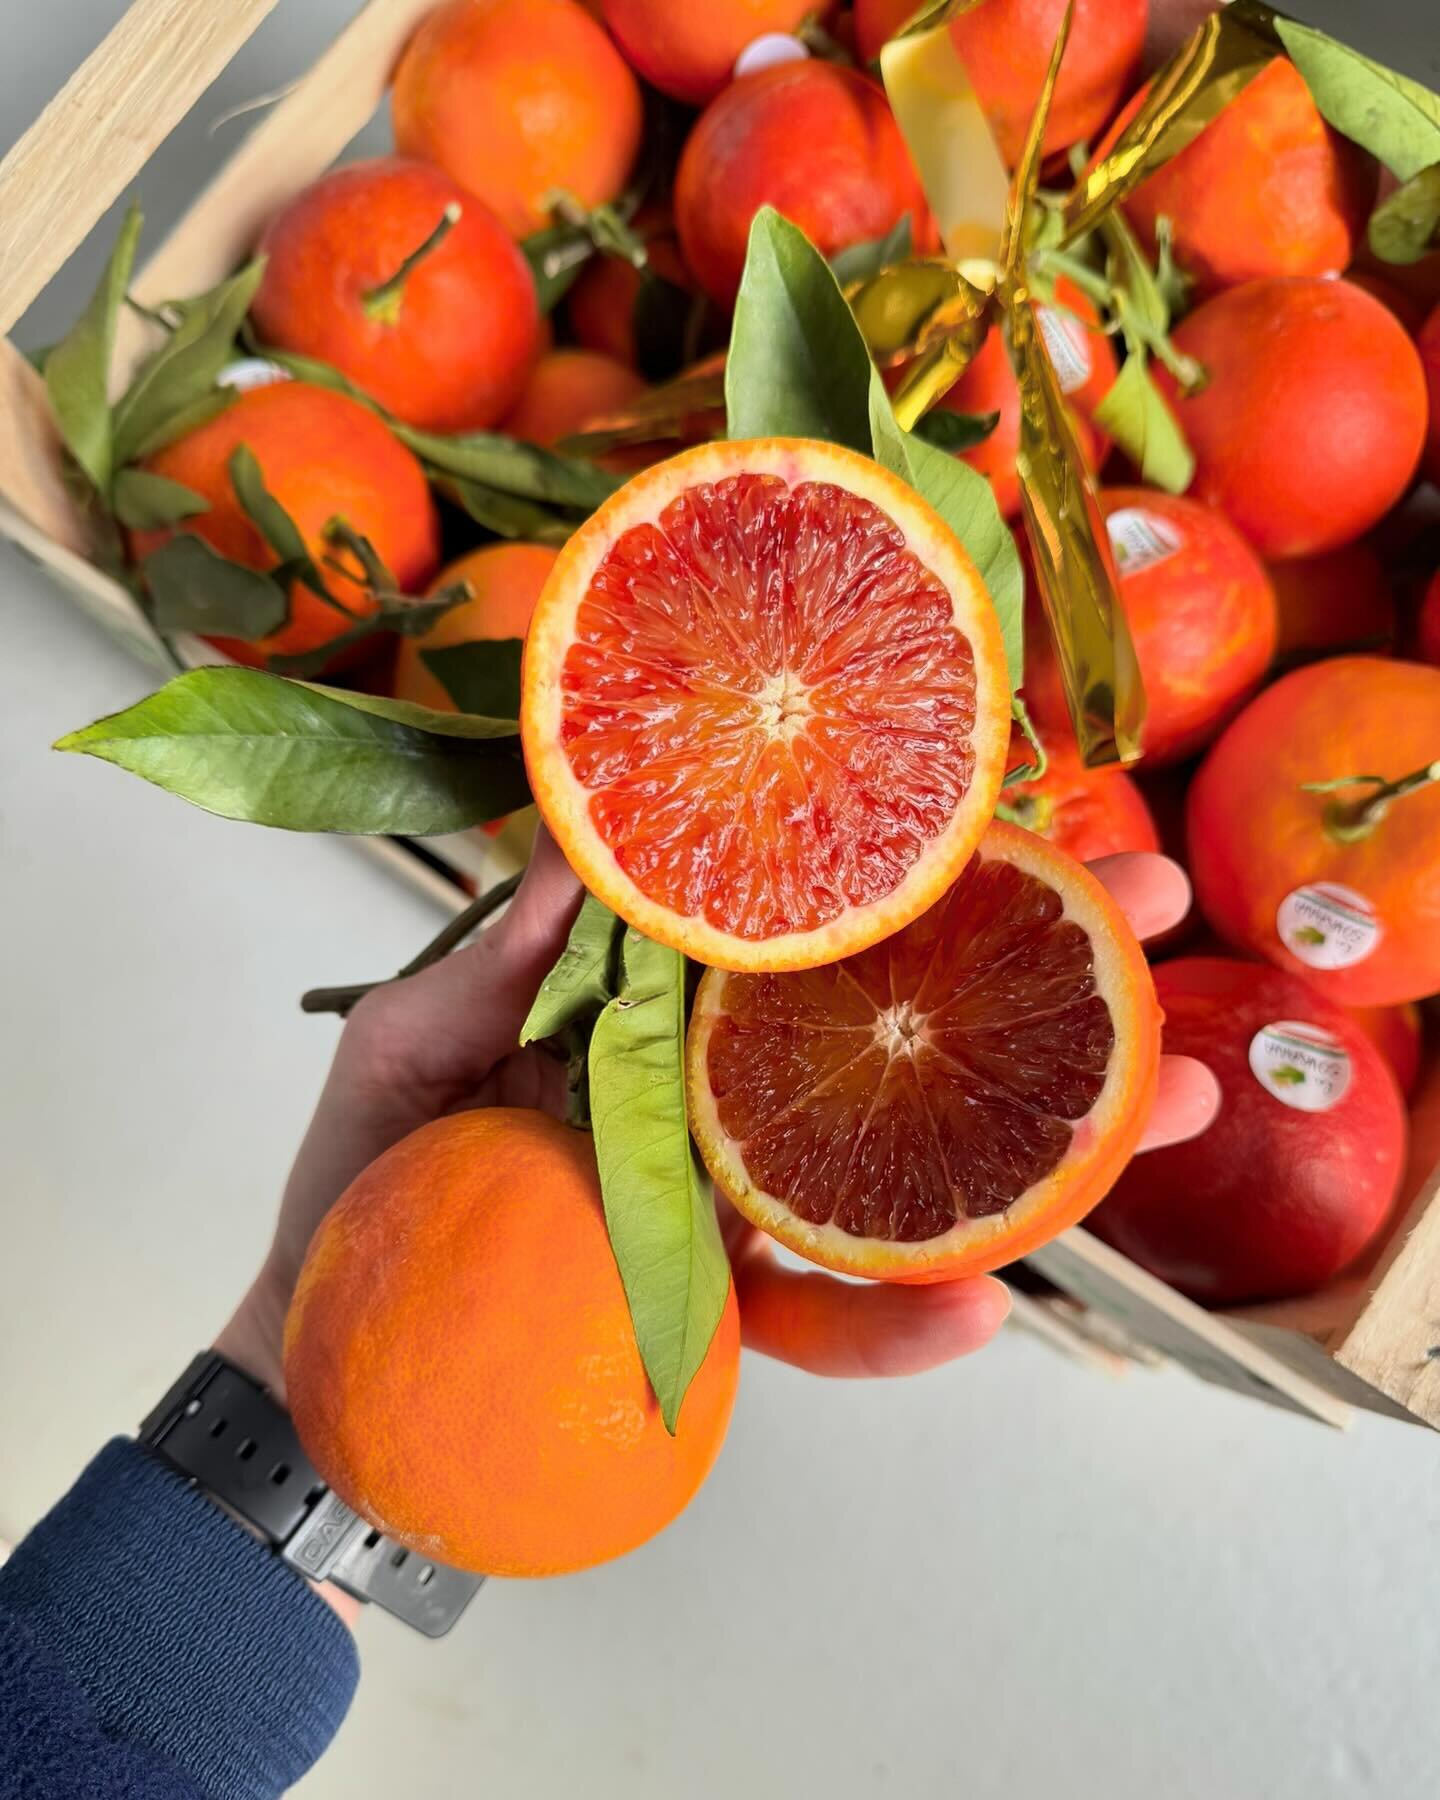 Tarocco oranges you say? Those aromatic beauties grown in Sicily on the fertile slopes of Mount Etna? Tied up in gold ribbons in those pretty boxes? Yes that&rsquo;s them. We got our hands on a couple of boxes and made cordial out of them and now it&